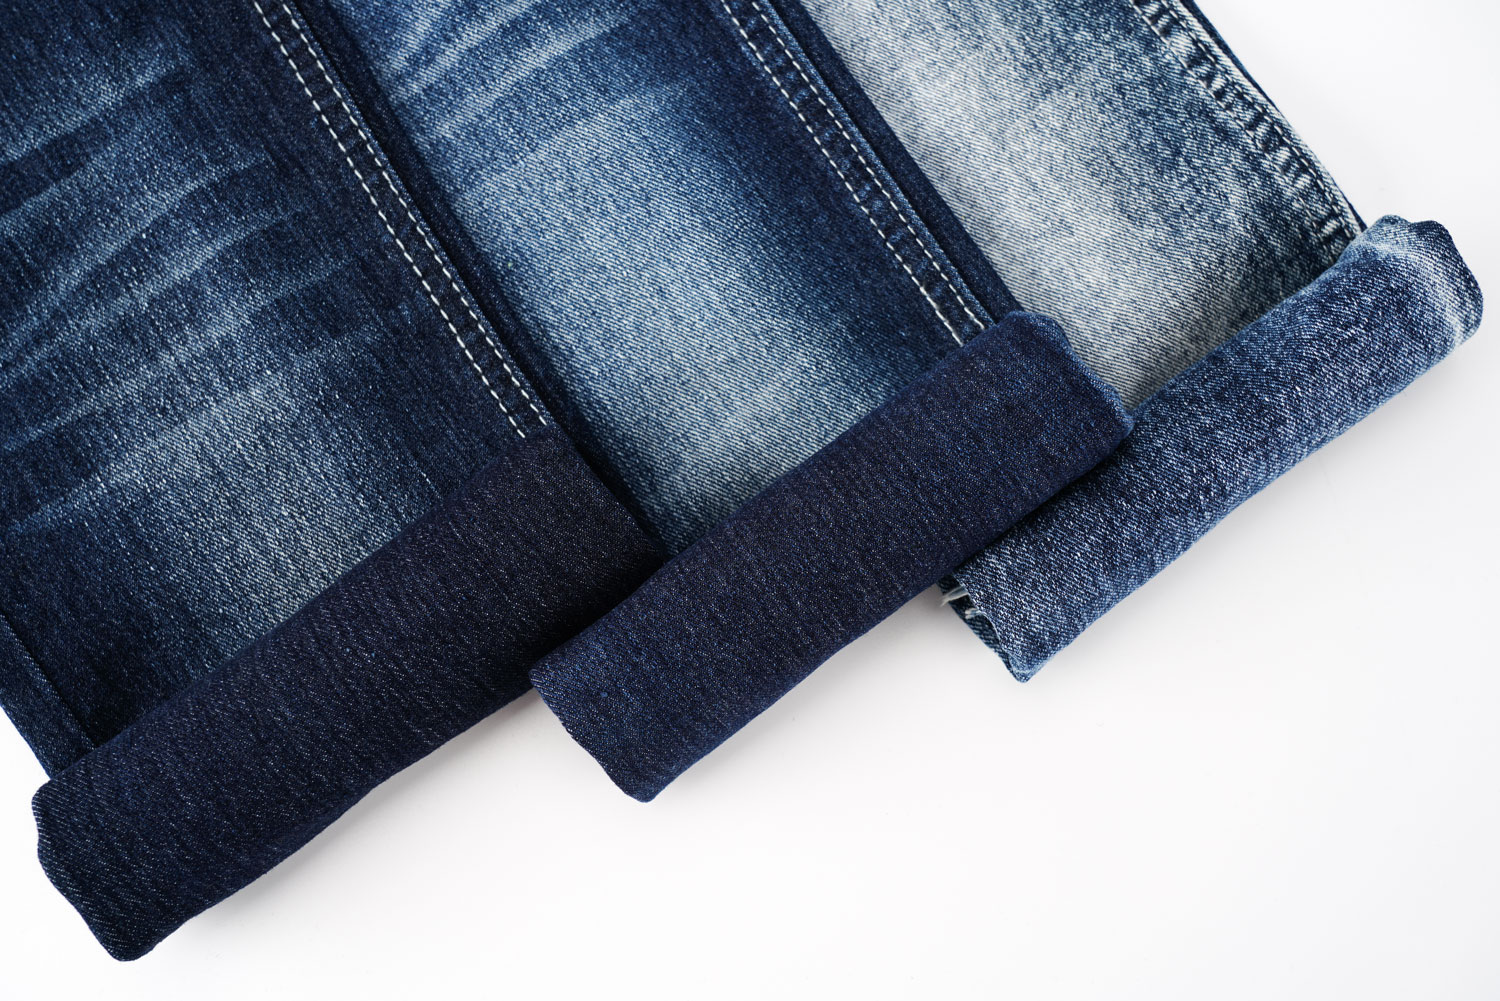 Denim Fabric Manufacturers: Are They Worth It? 2